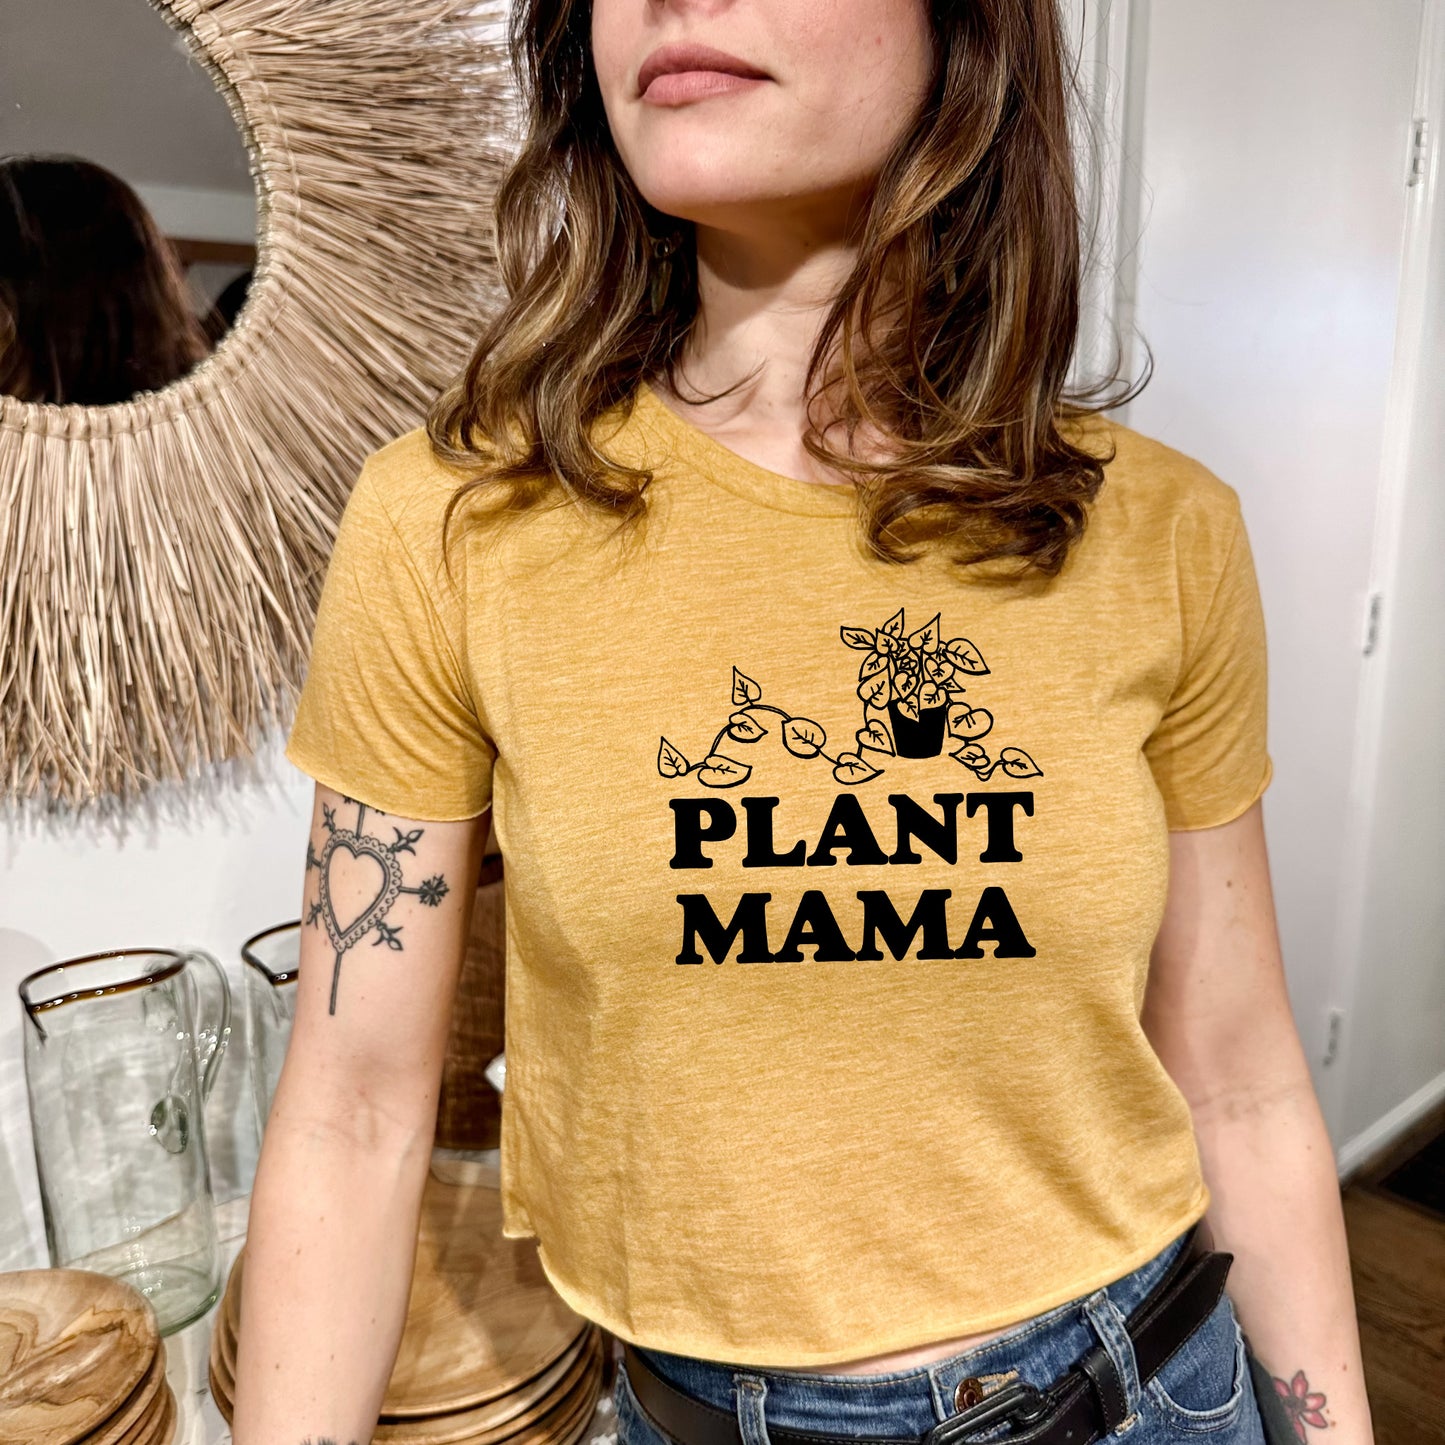 Plant Mama - Women's Crop Tee - Heather Gray or Gold